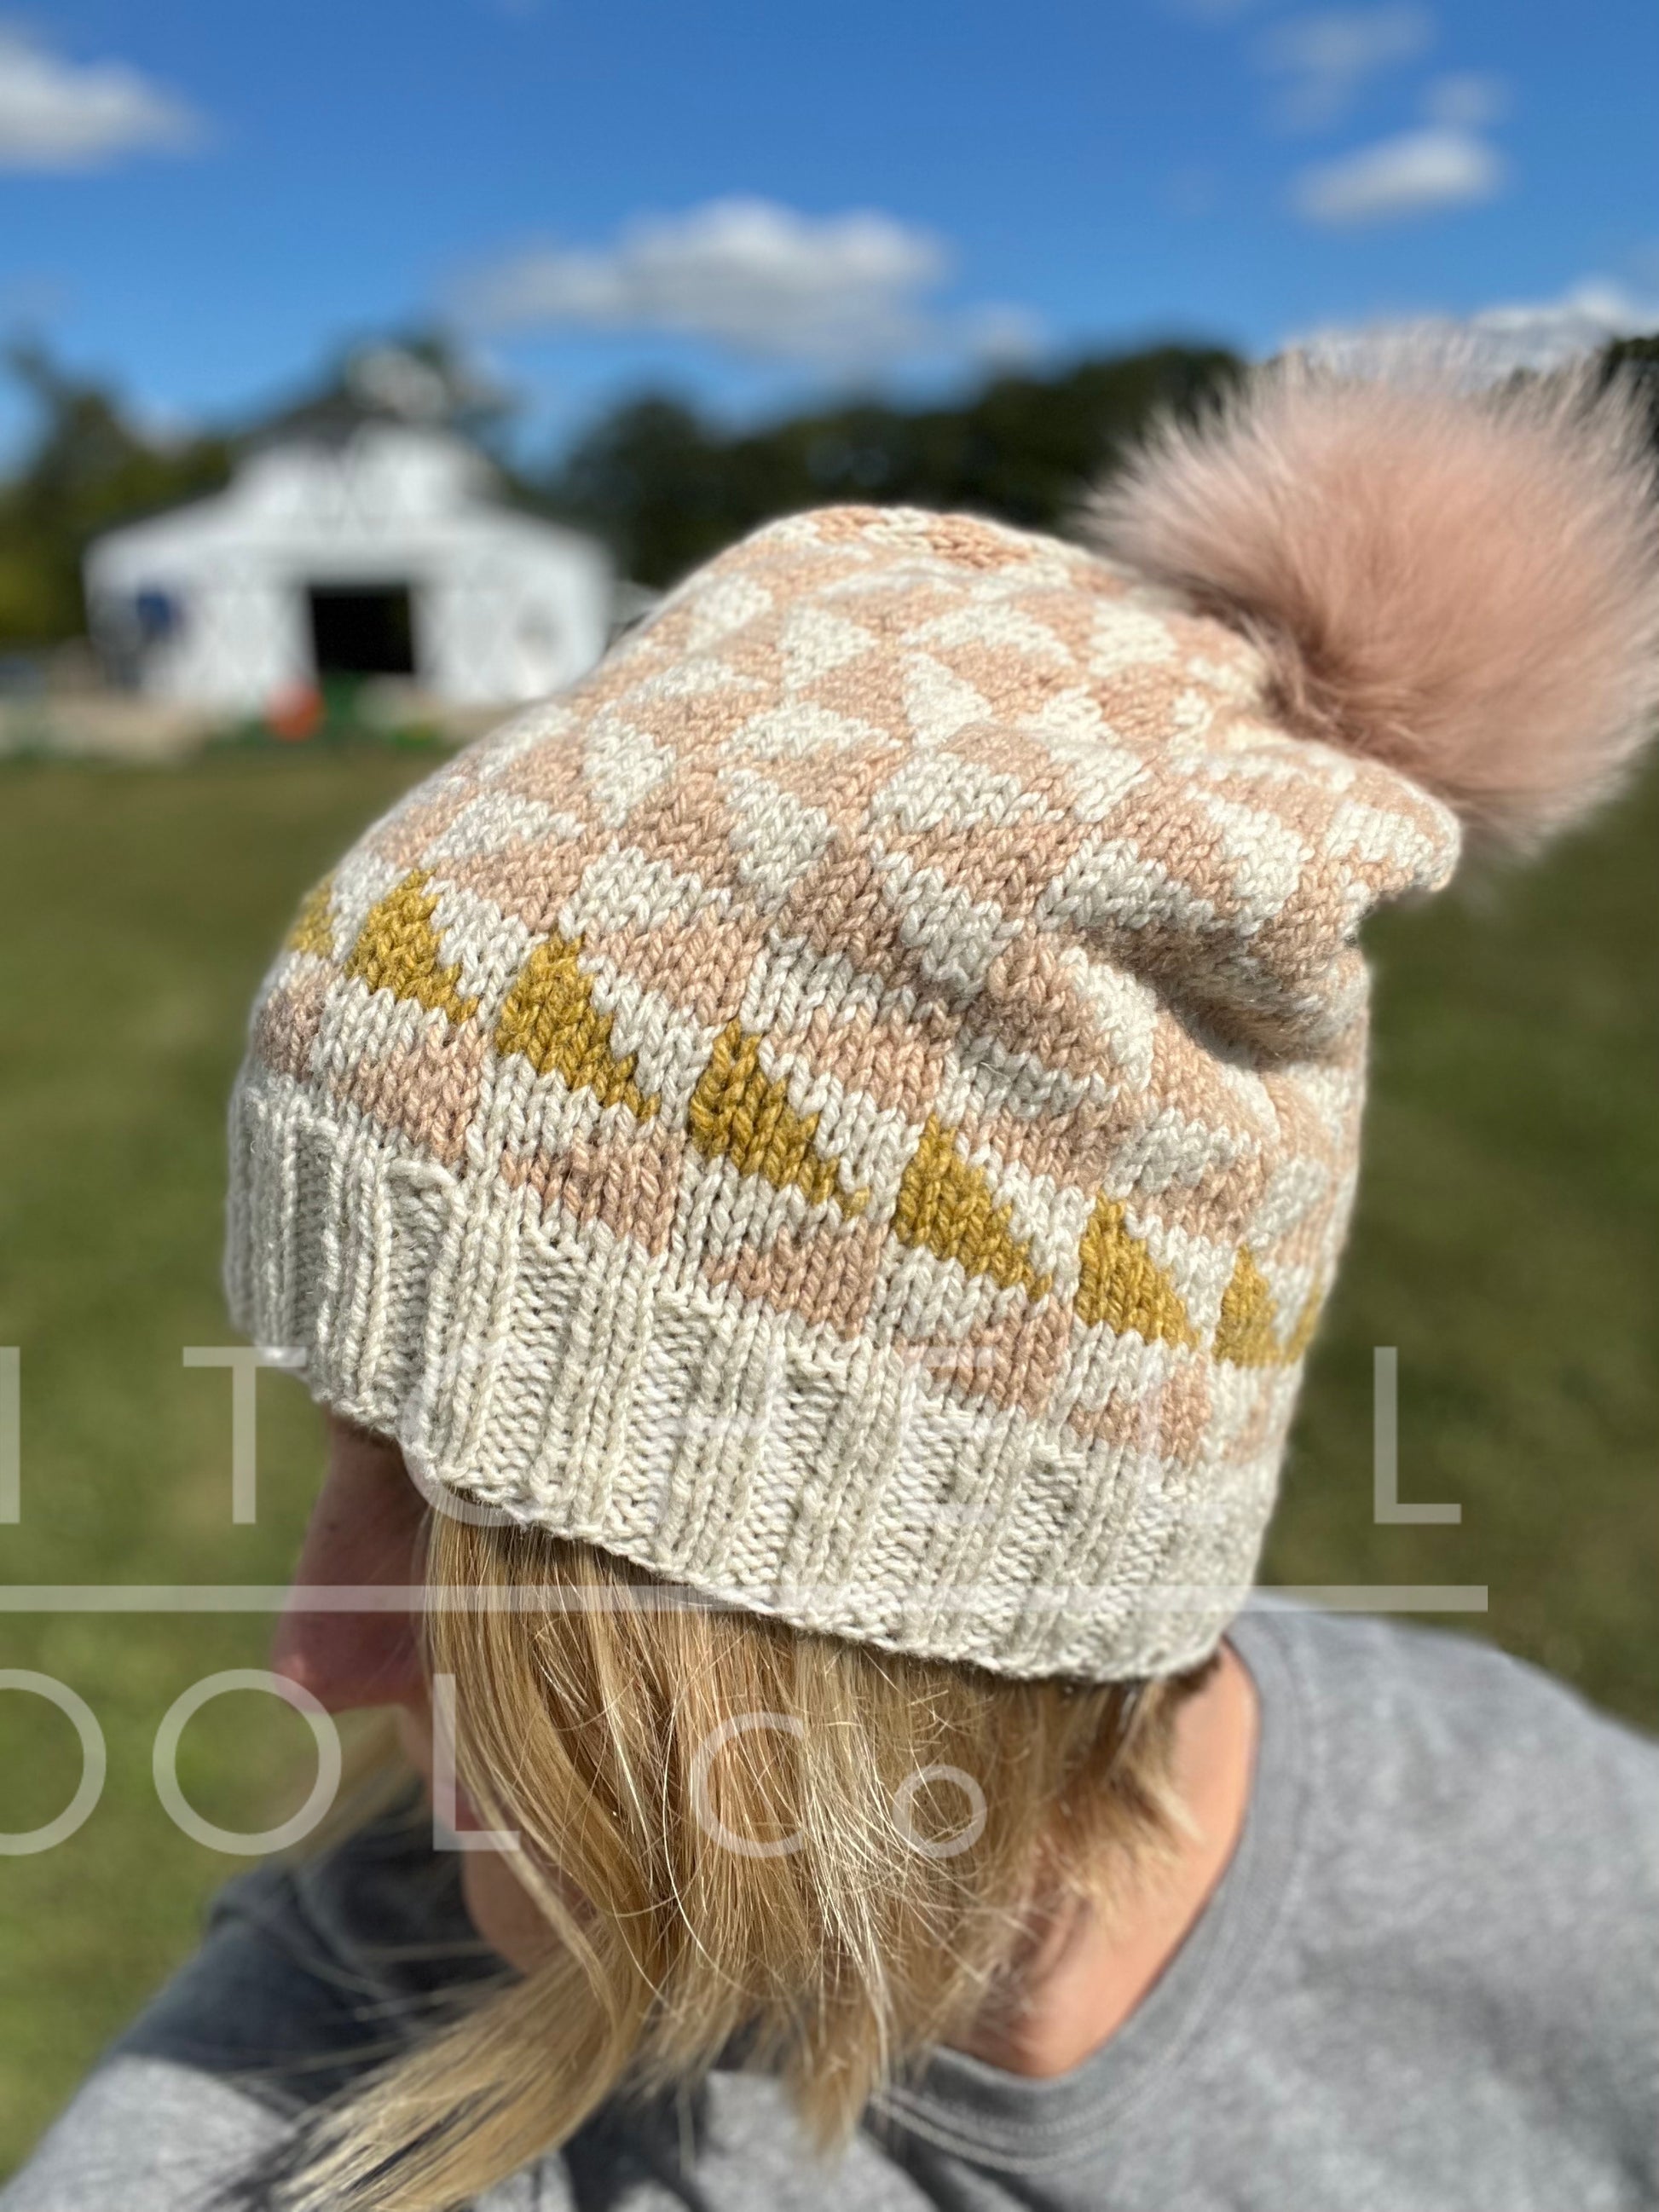 Sherry wears the Llariega hat knit by Jessica Lepak, pattern by Belen Fernandez. It is knit in our natural Raw Dk with Avocado and Marigold accents.This is version A of the pattern. 